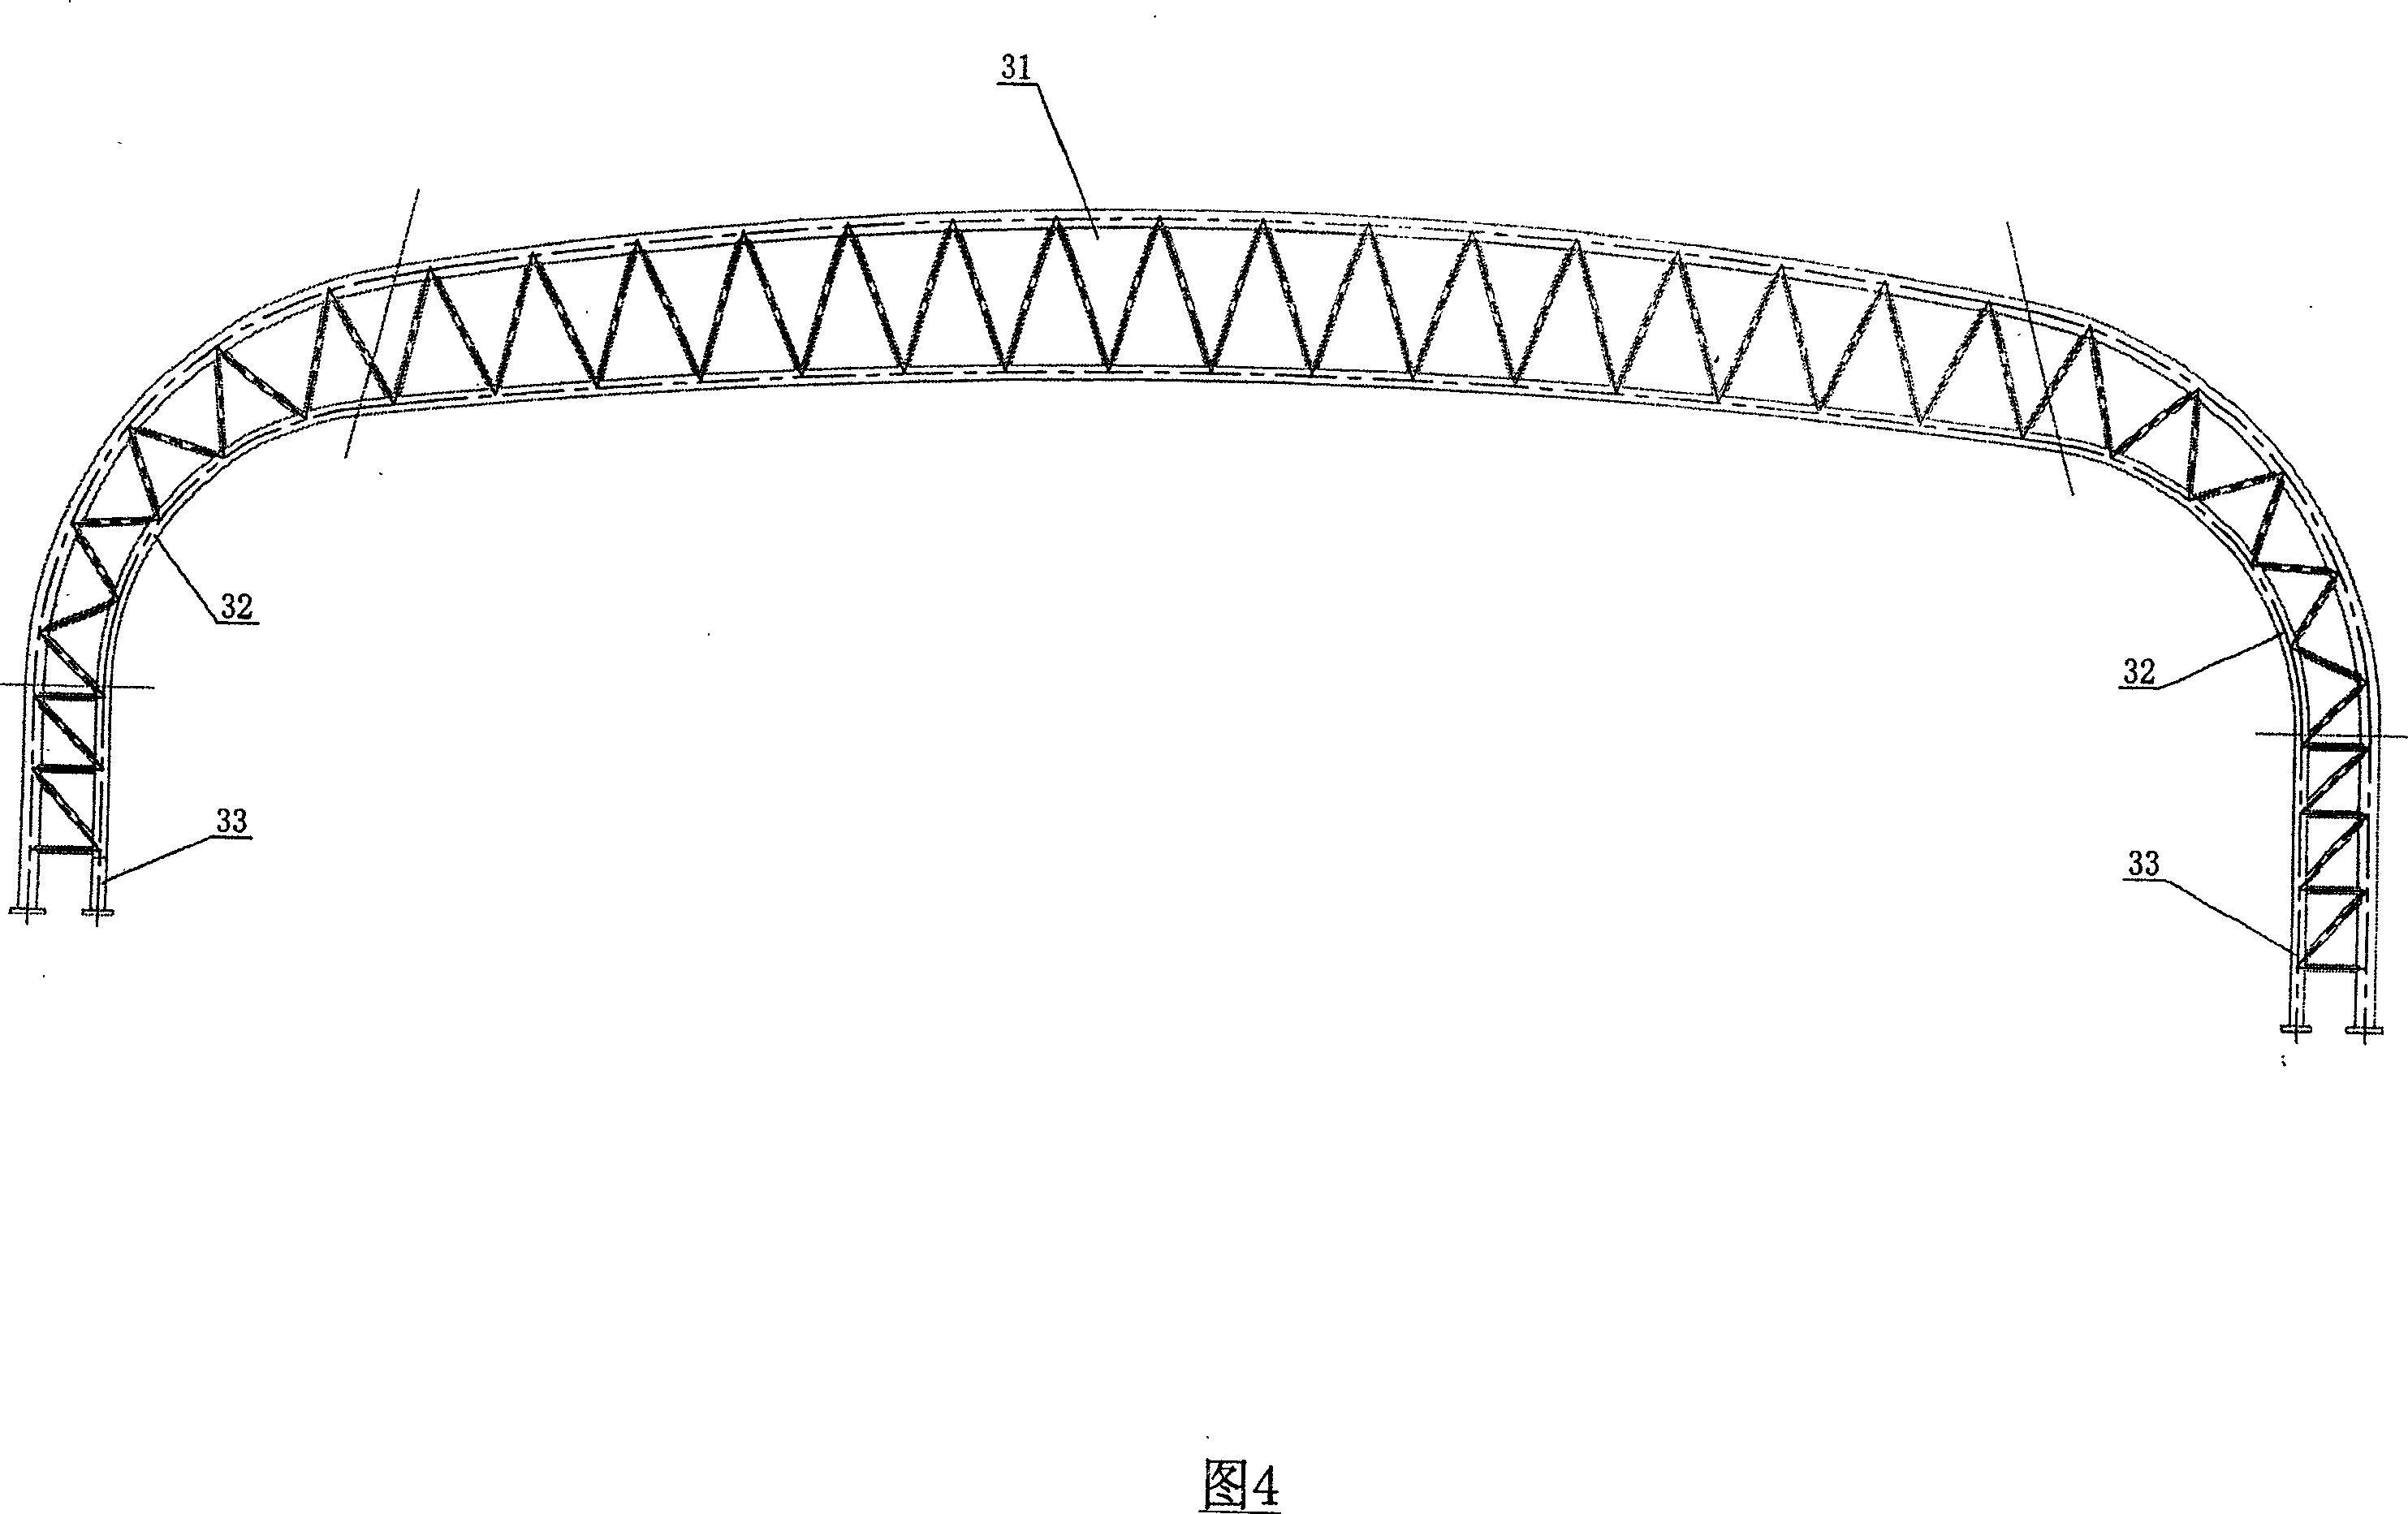 Method for constructing steel truss over existing railway line and transporting, mounting and positioning bogie